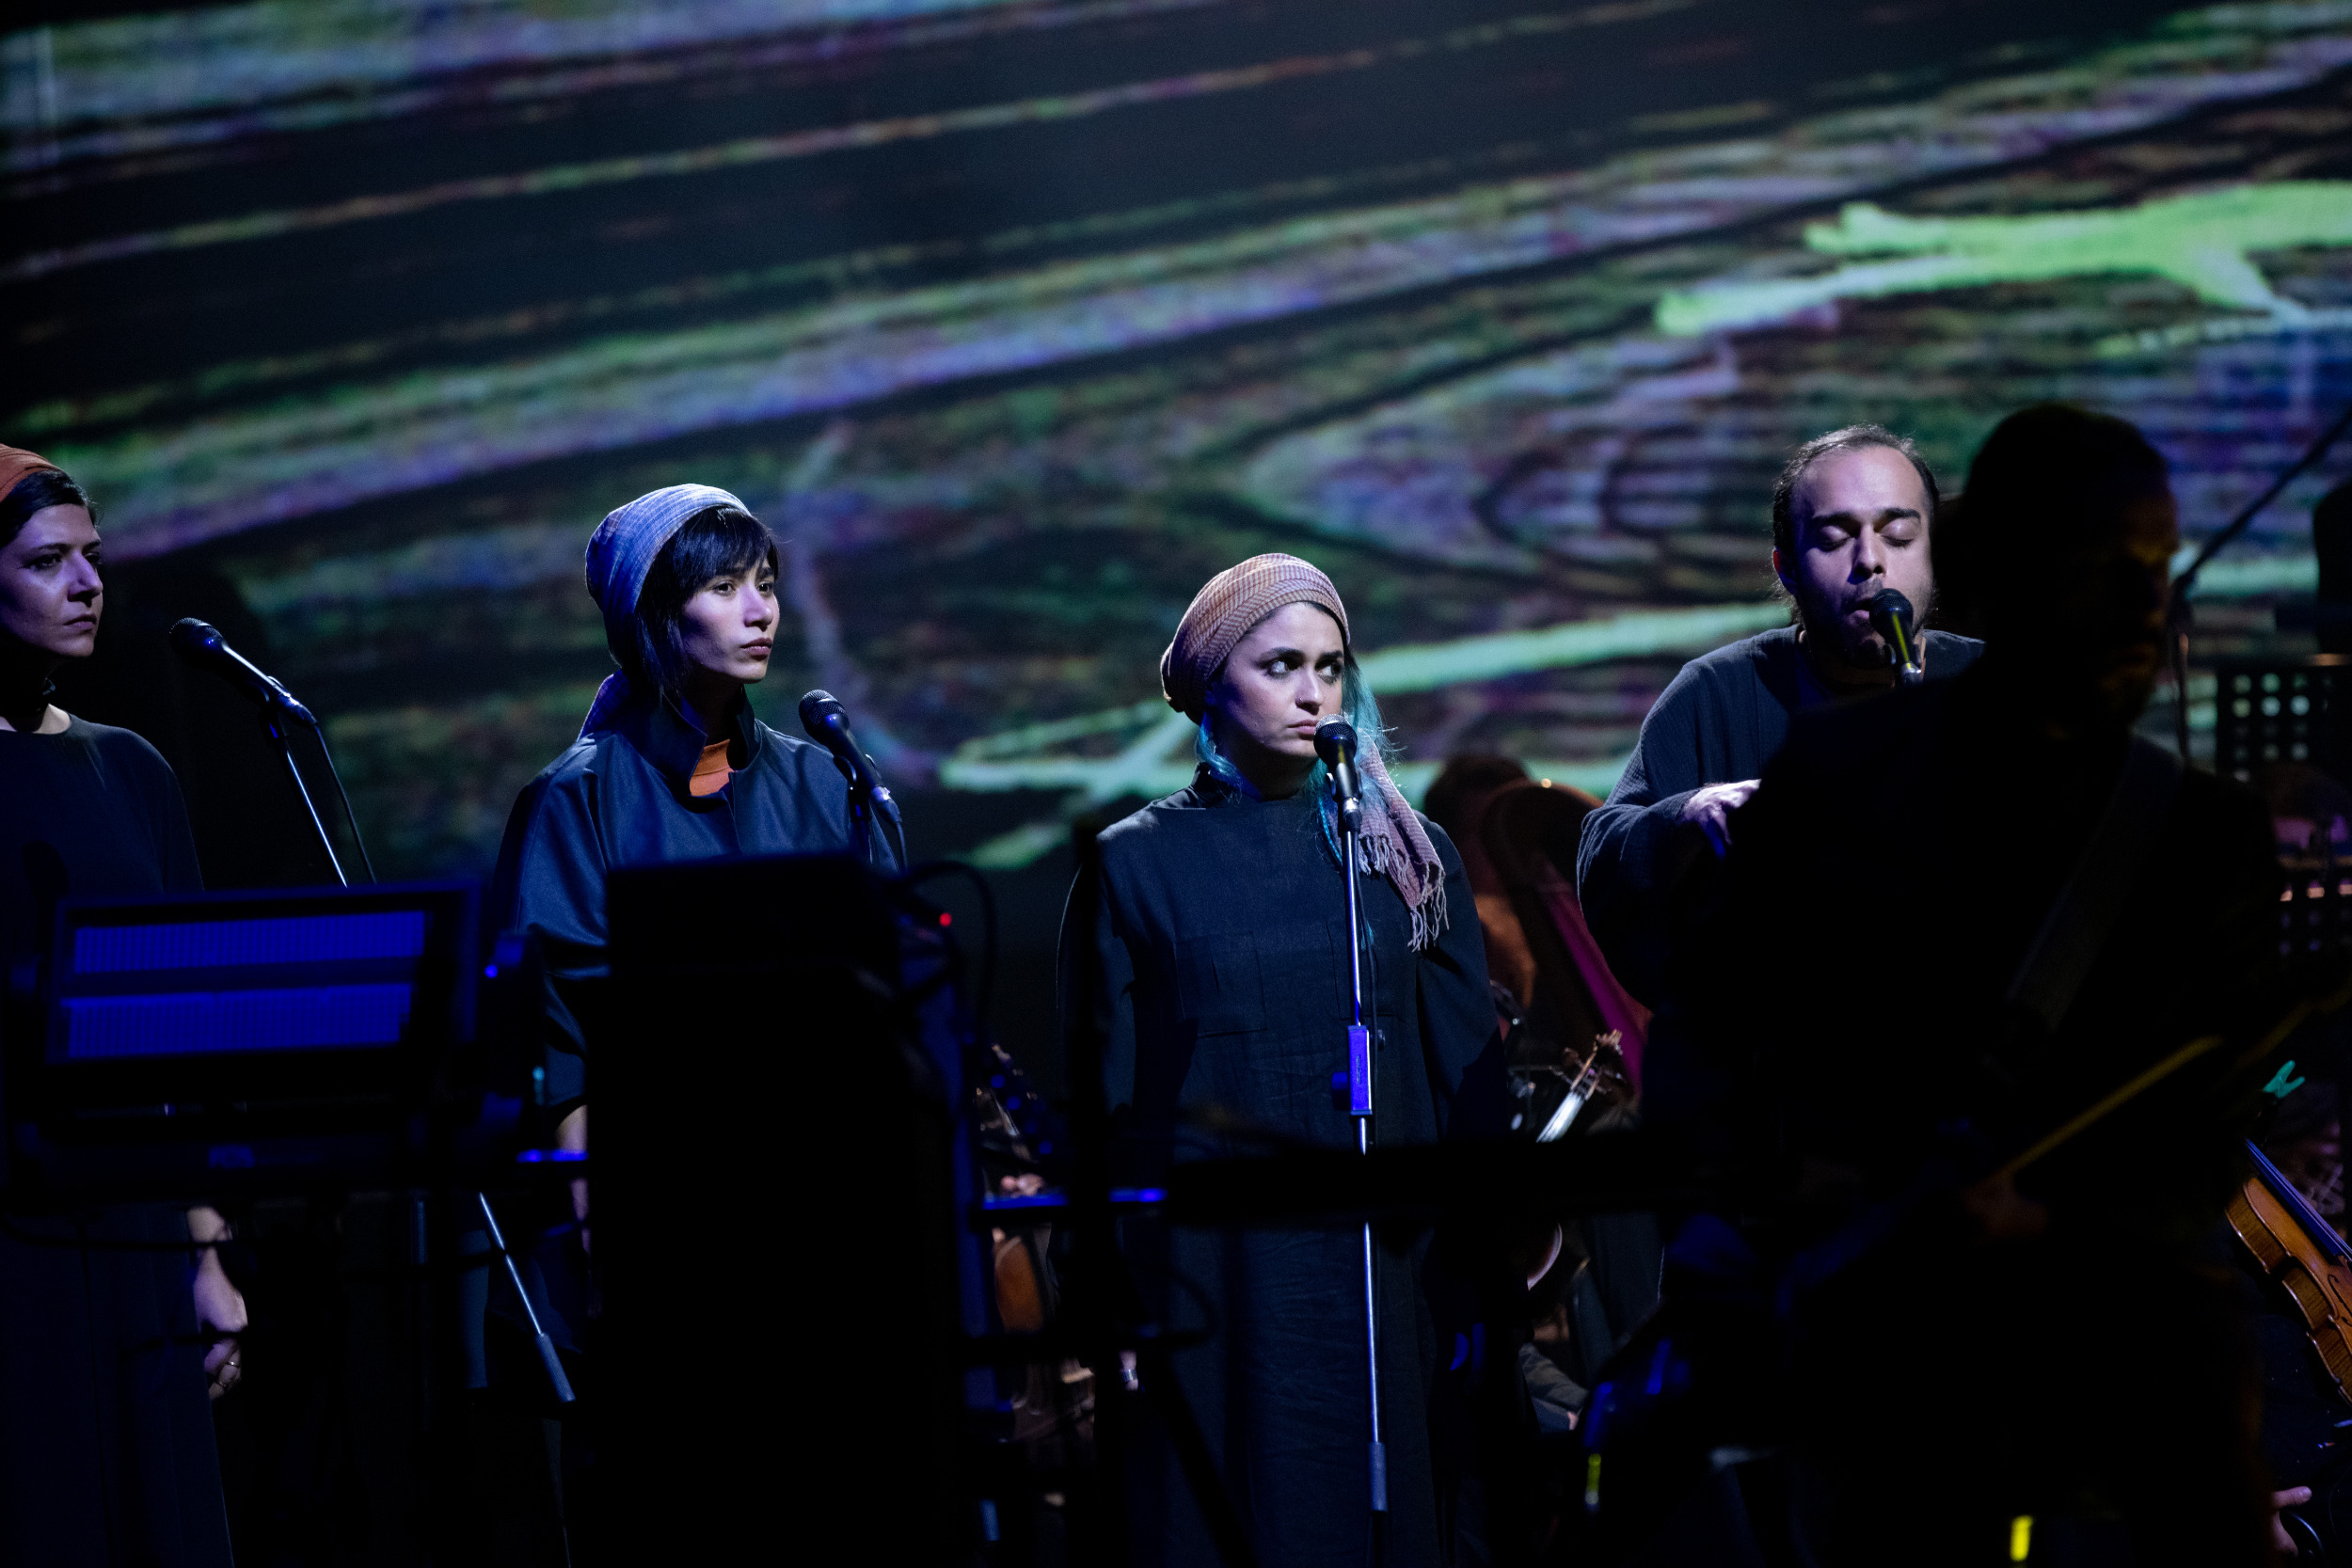 Screenshot from the performance of Alamut by Laibach in Ljubljana, Slovenia. This image depicts the Iranian vocal ensemble.